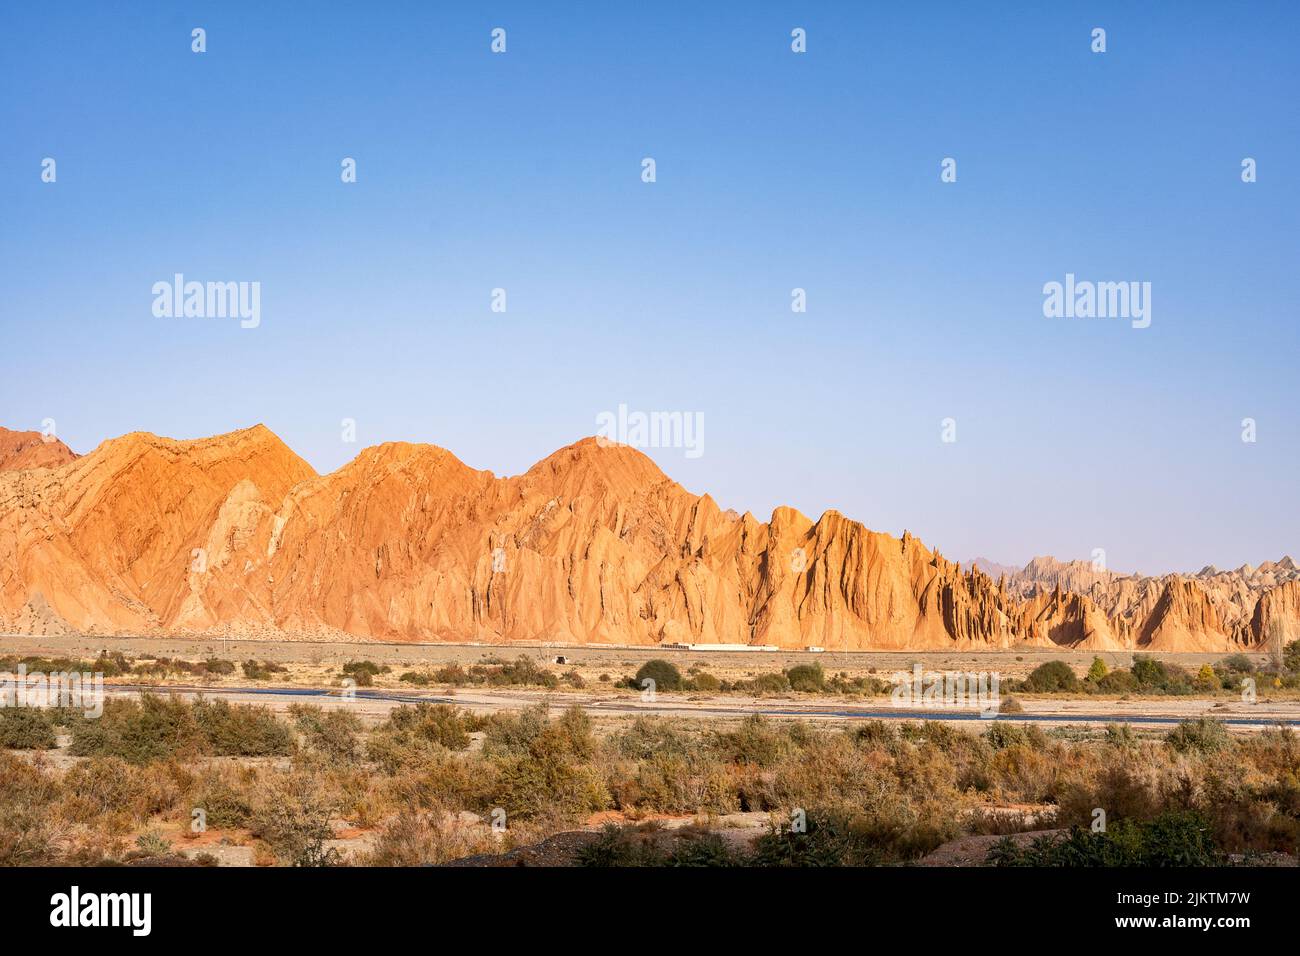 The beautiful view of the sandstones against the blue sky. Stock Photo